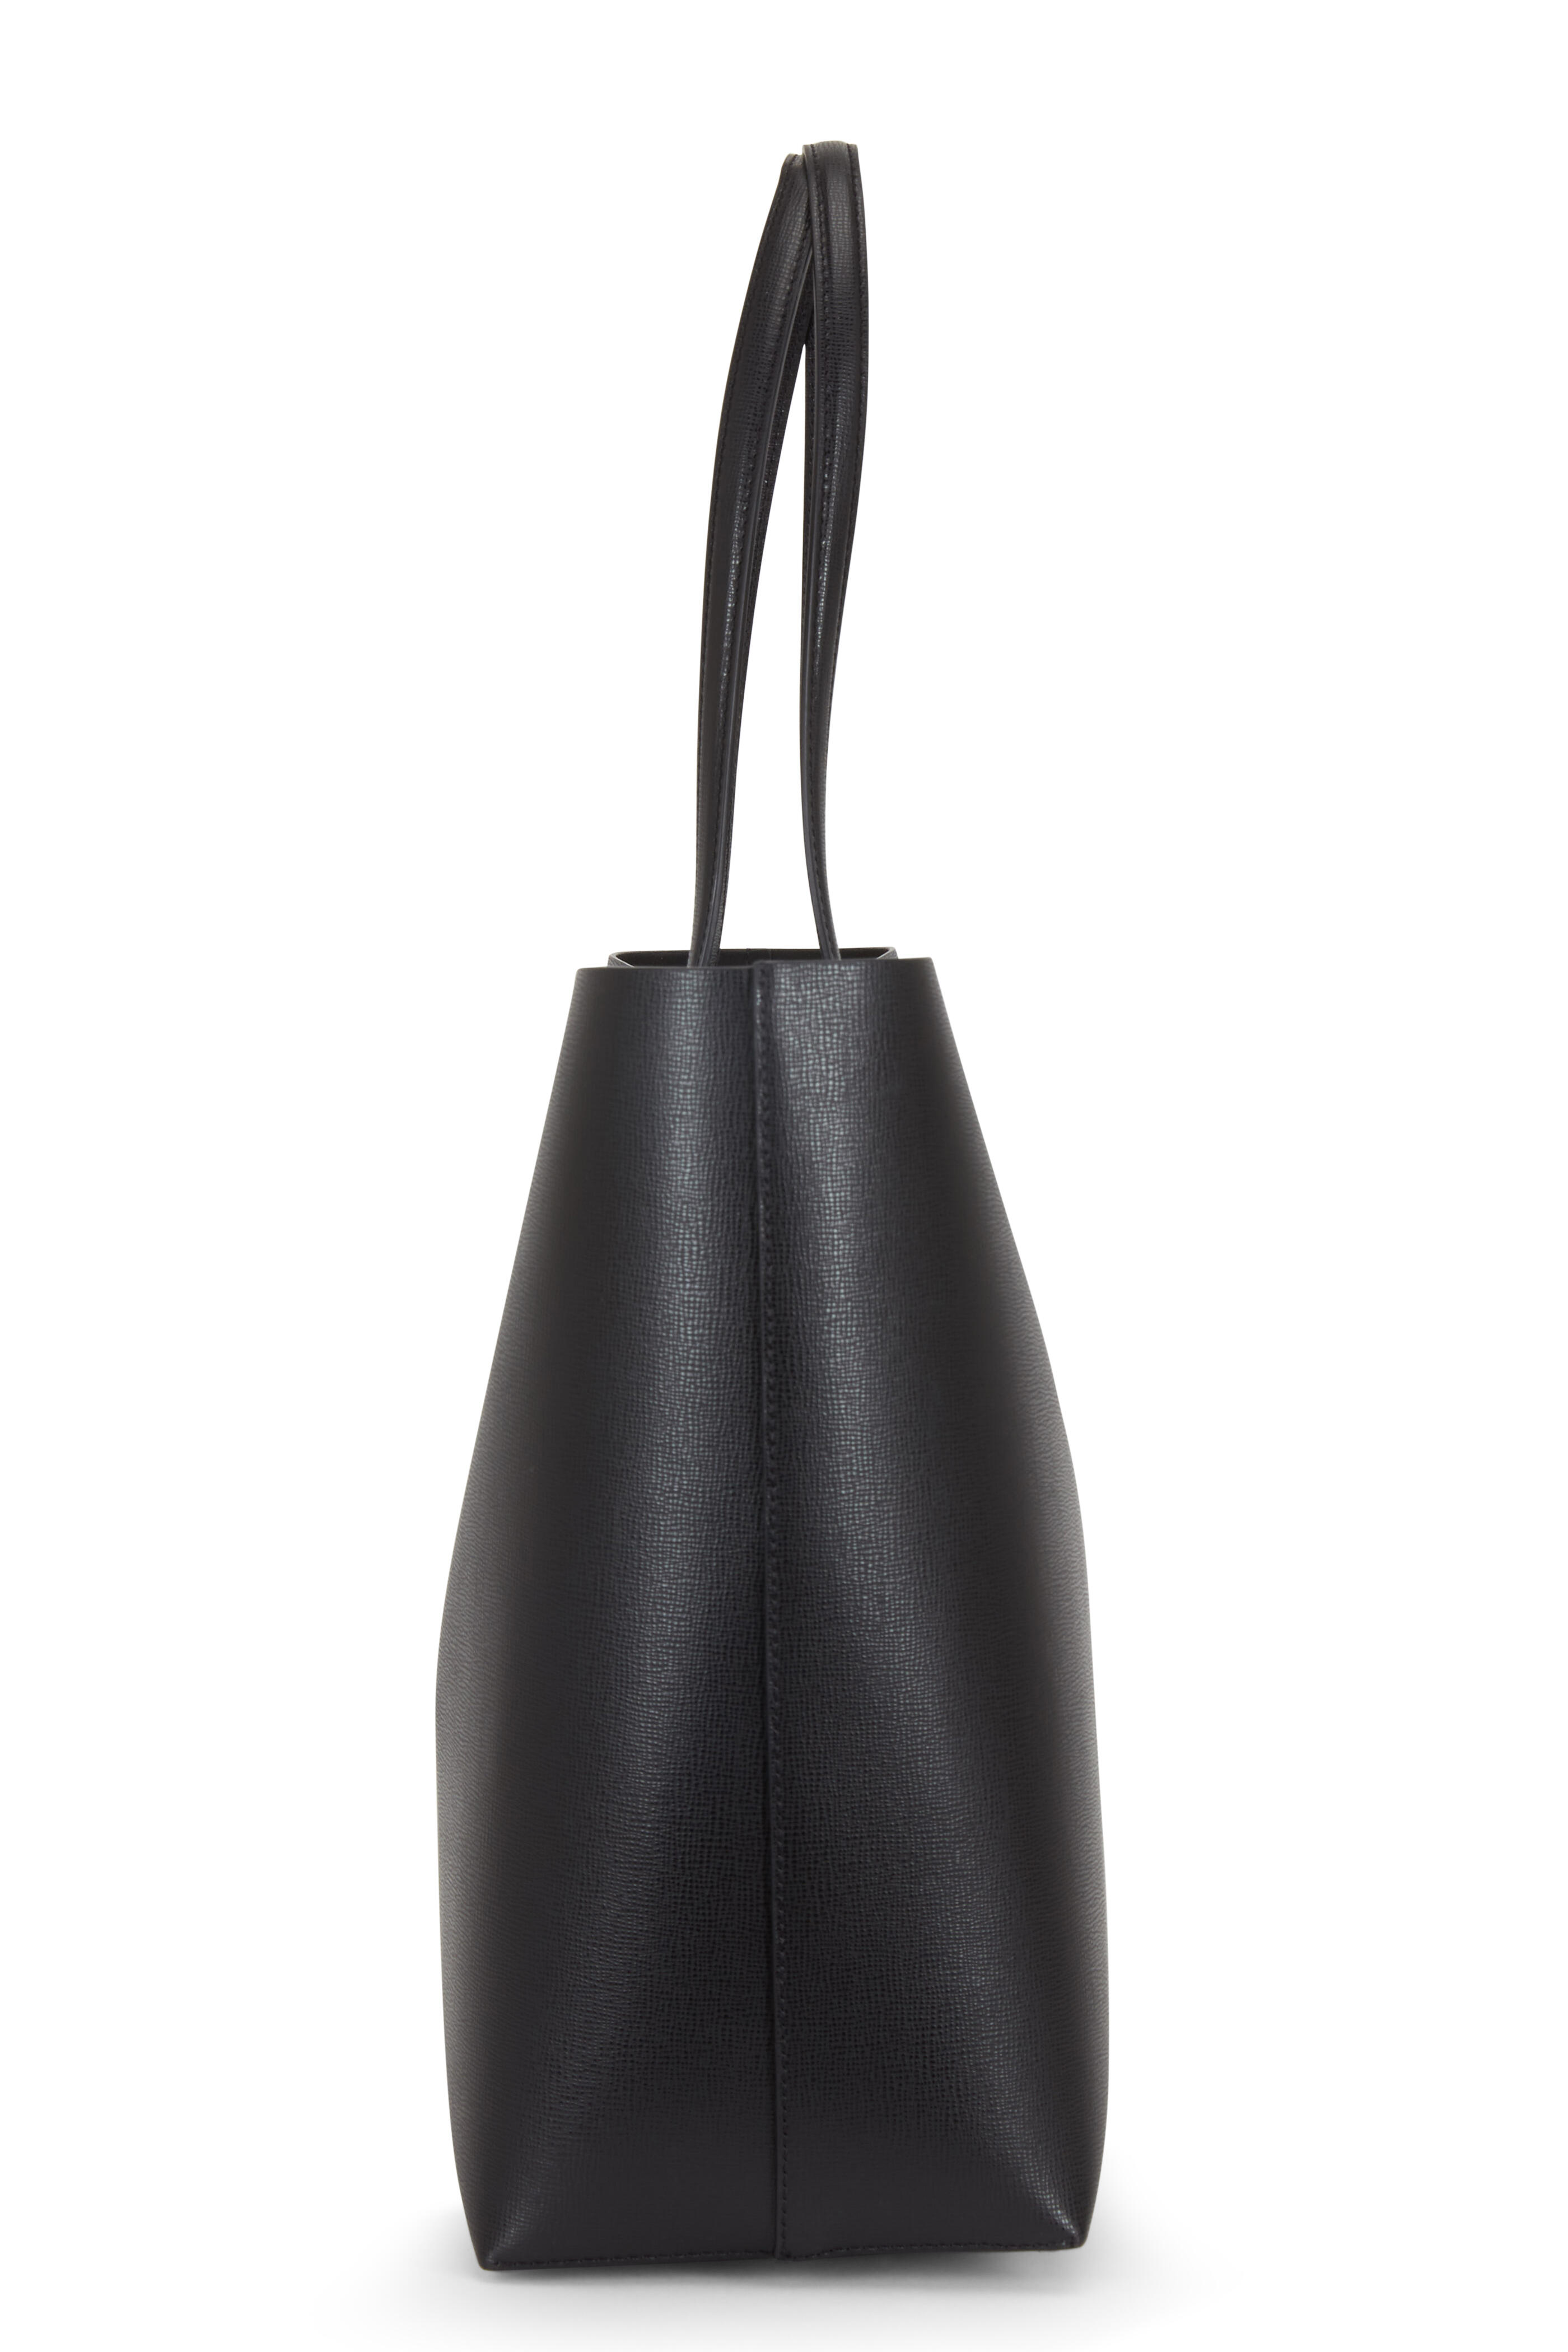 Tom Ford - Black Saffiano Leather Medium T Tote | Mitchell Stores